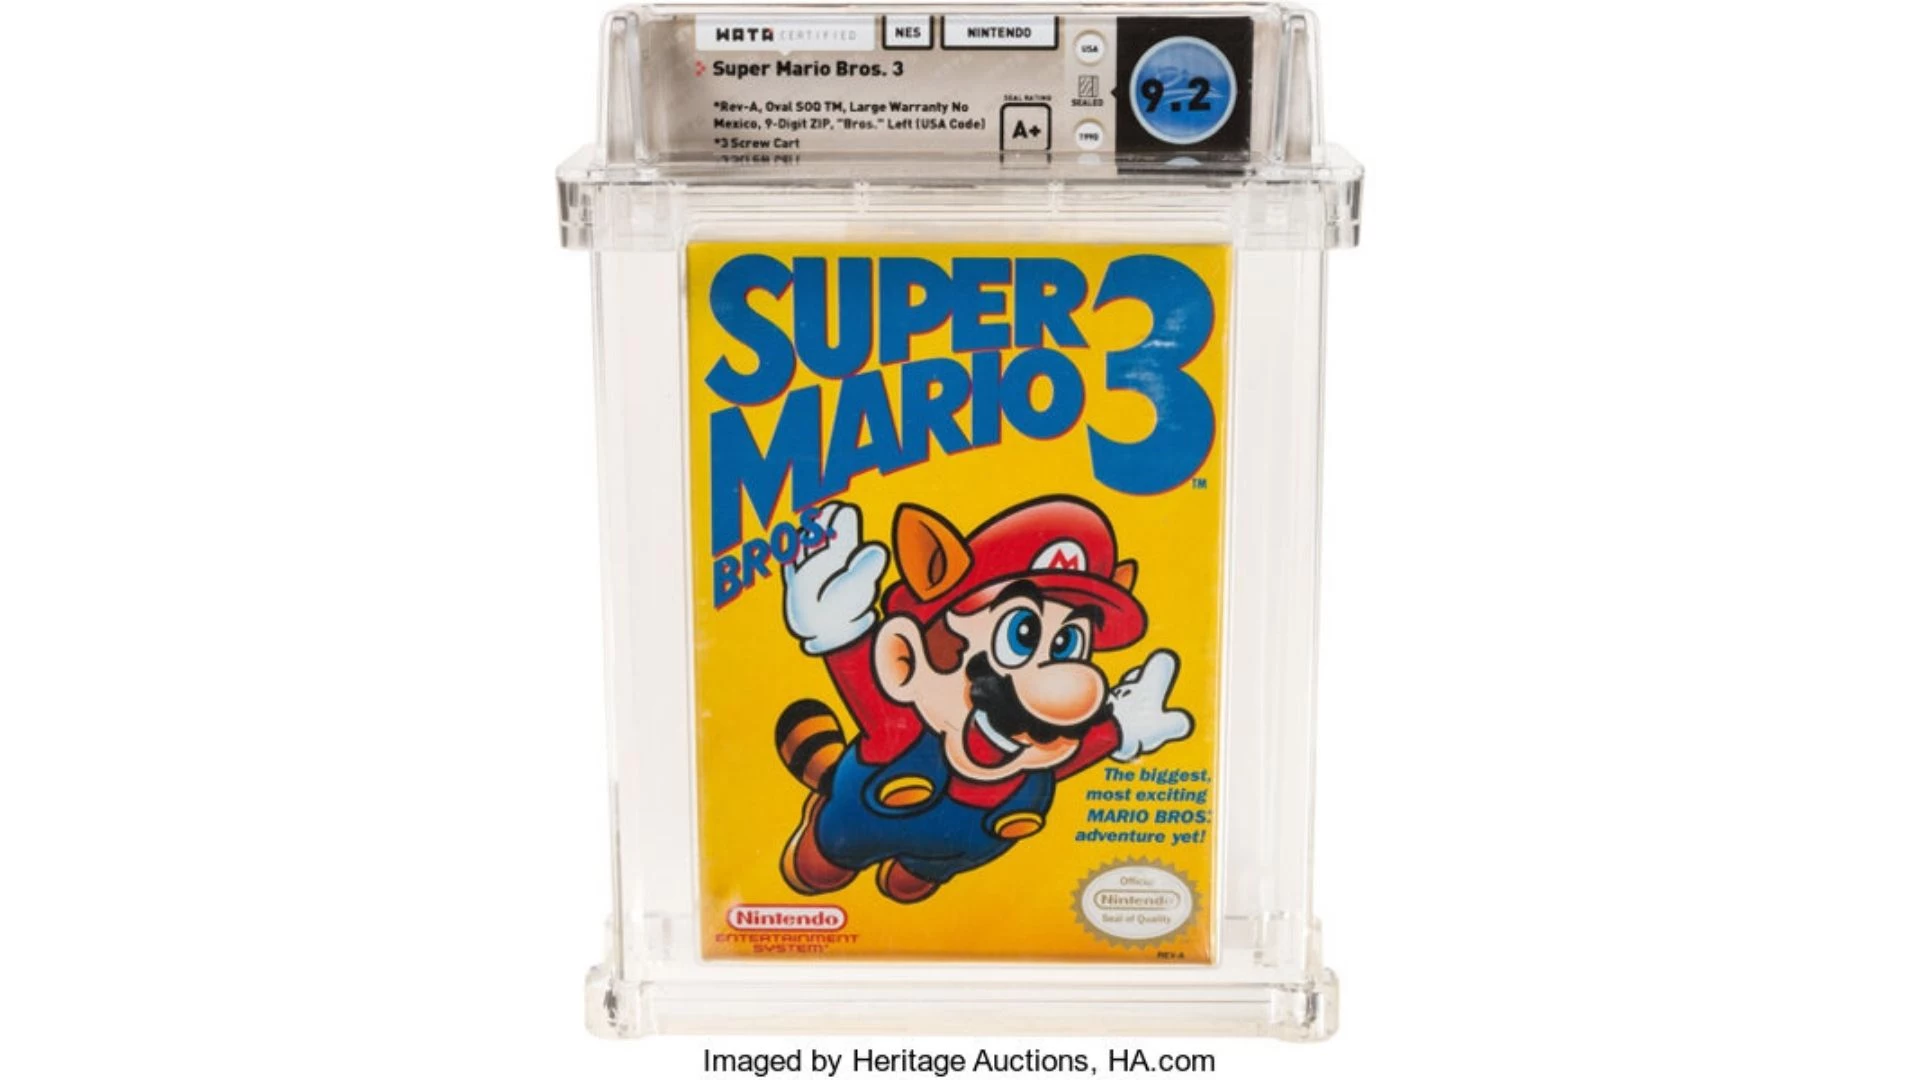 Super Mario Bros. 3 Sold for $156,000. Here's why.